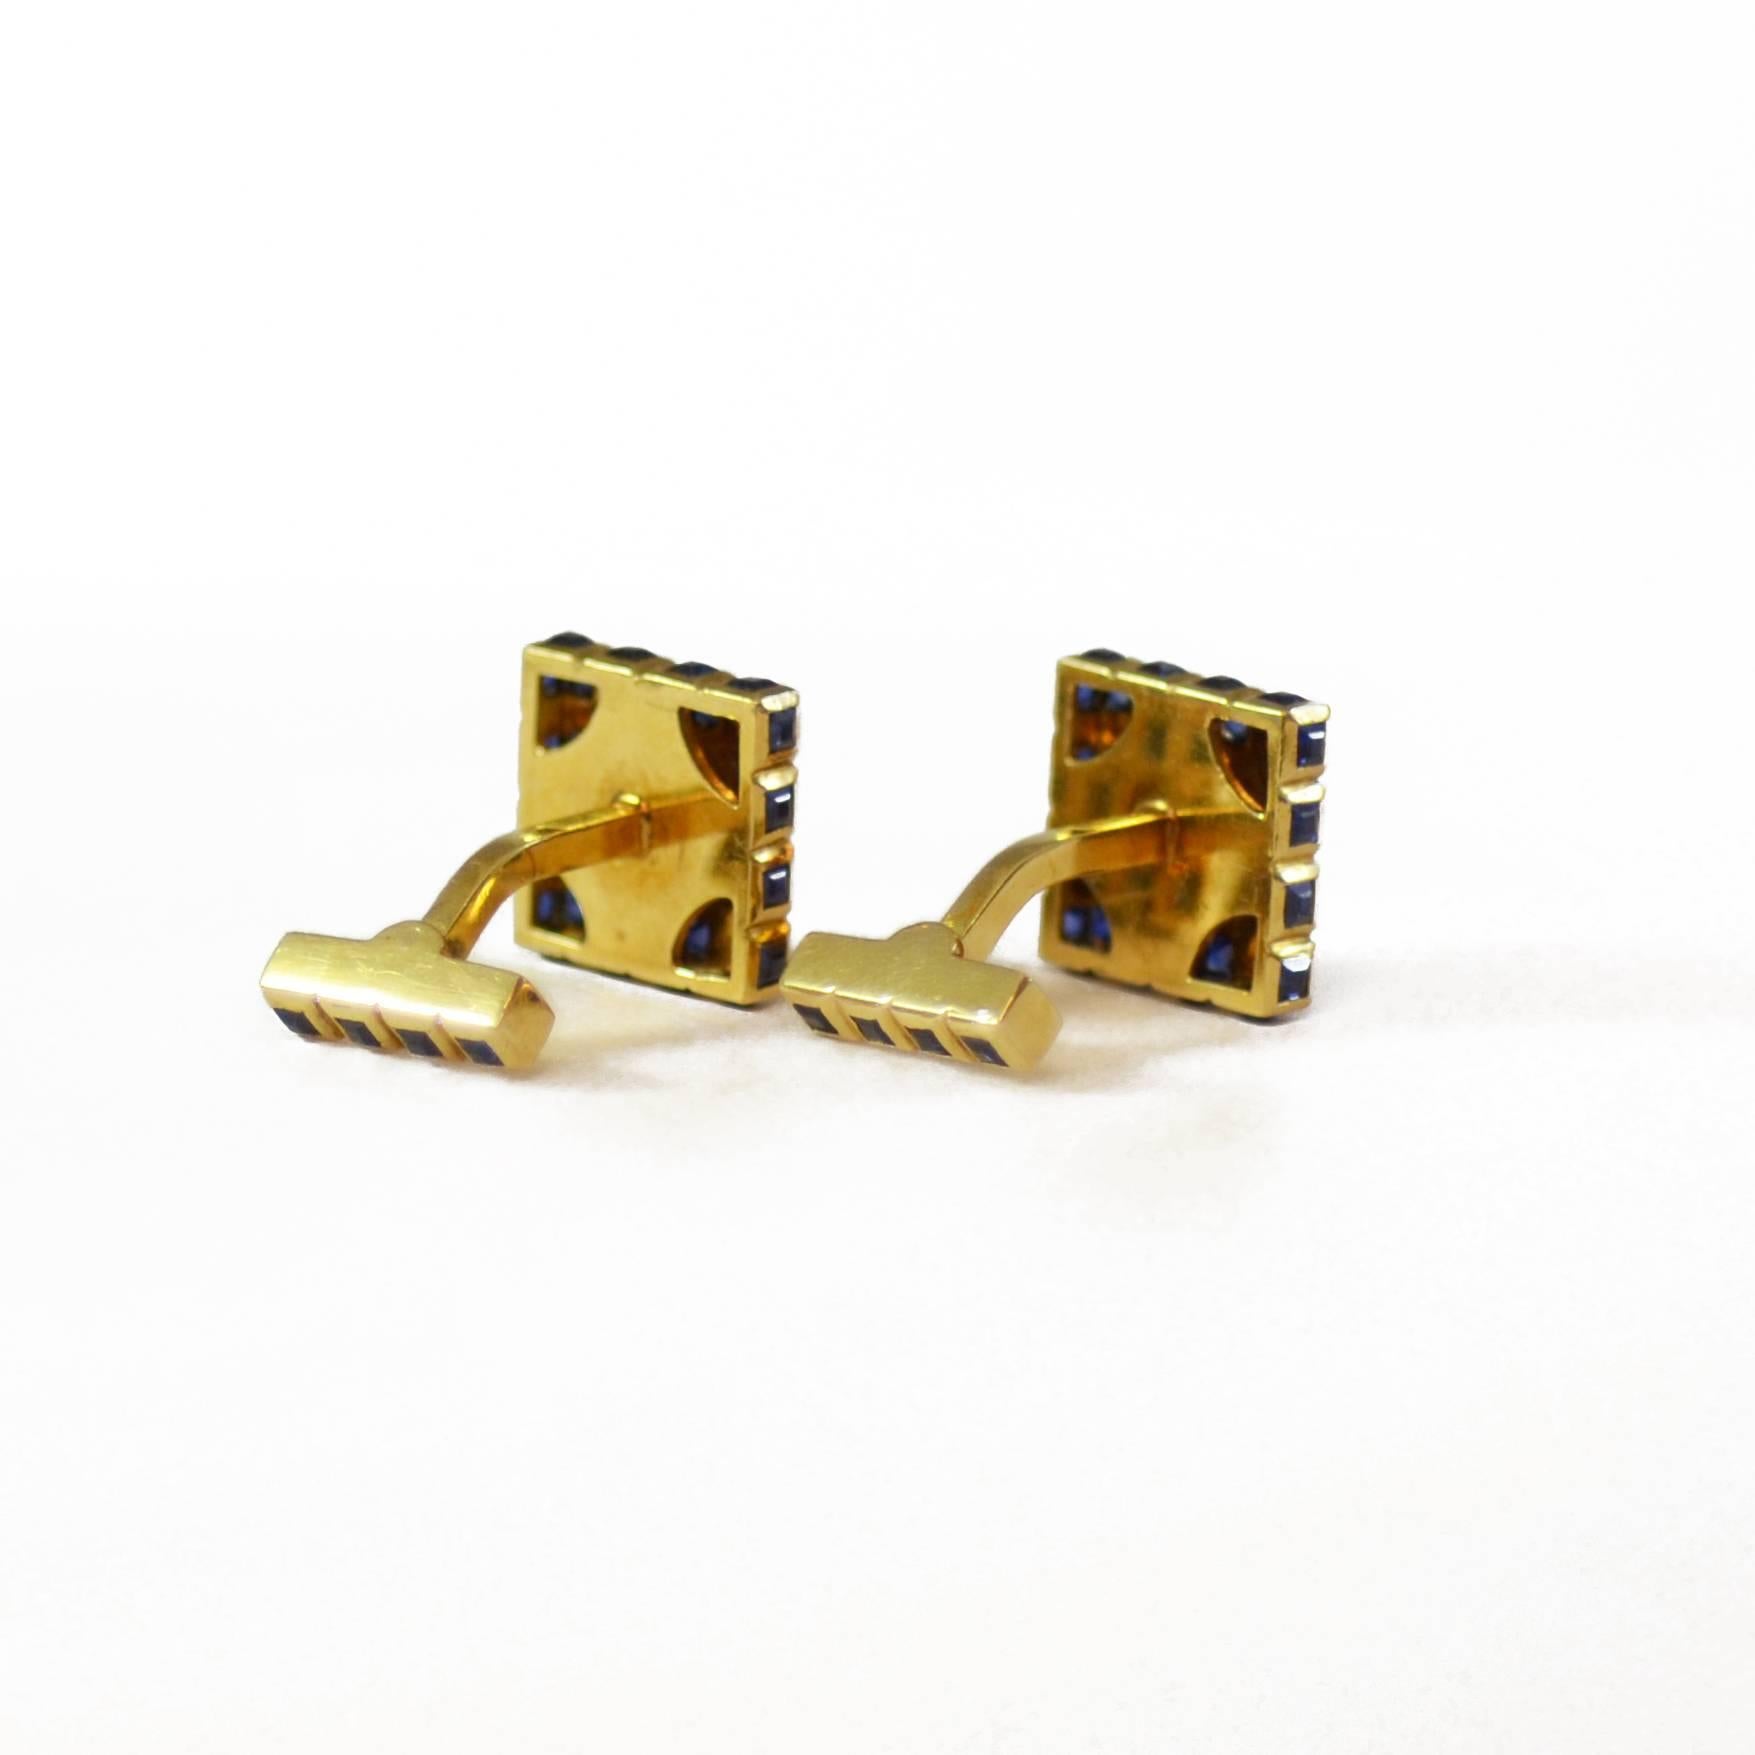 Pair of square shaped cufflinks by Tifffany & Co. Set with sapphires in a grid pattern and mounted in 18ct yellow gold. American, circa 1950.